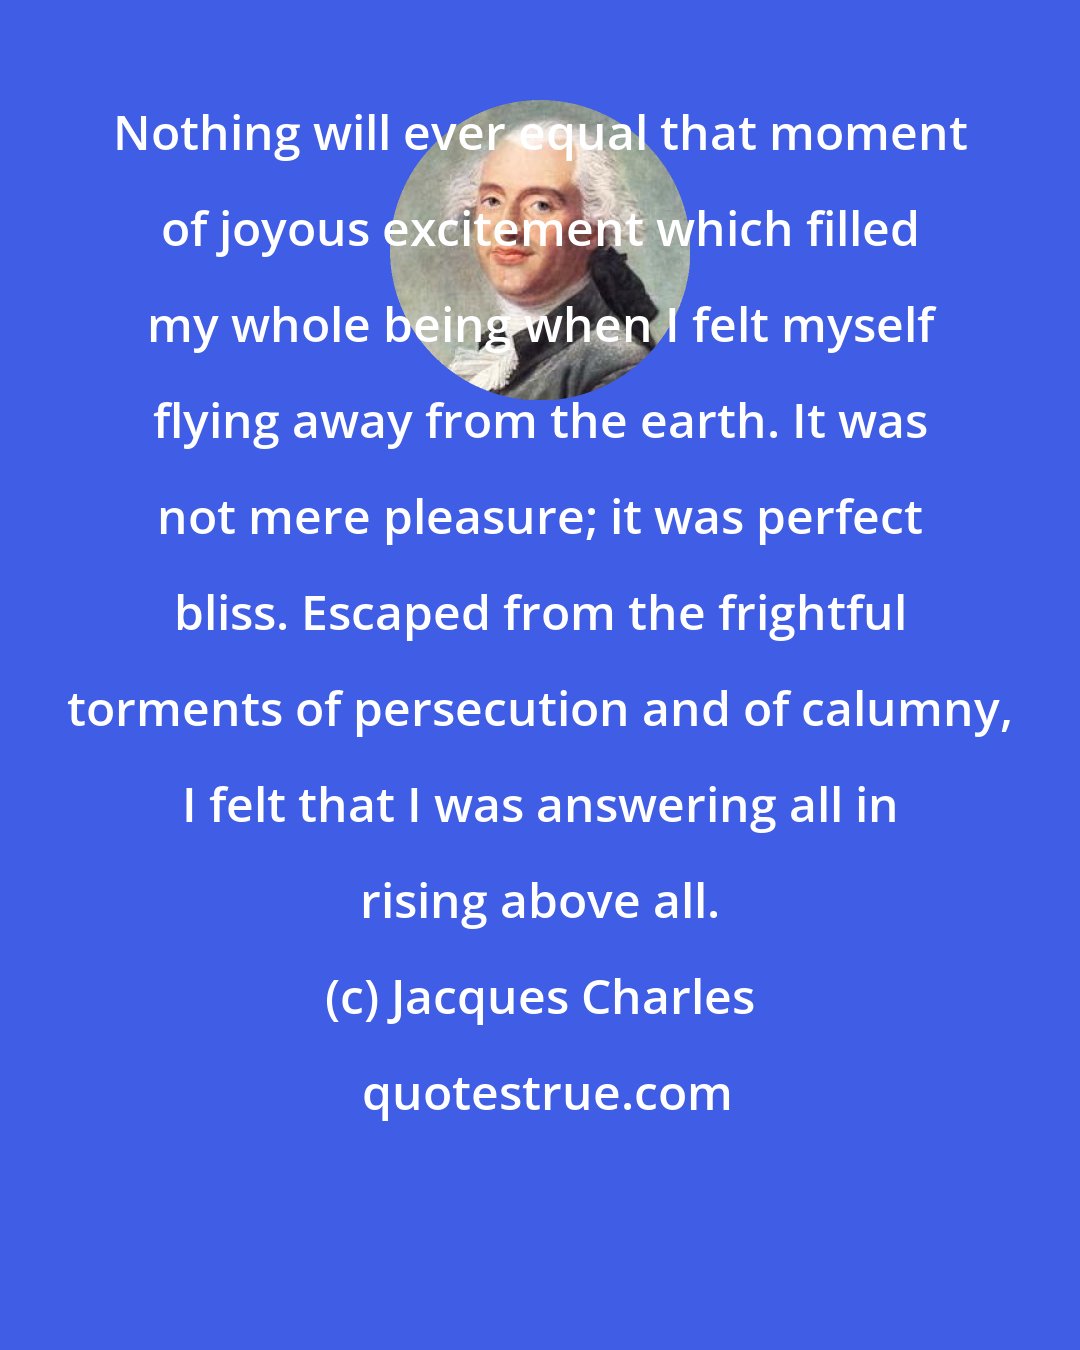 Jacques Charles: Nothing will ever equal that moment of joyous excitement which filled my whole being when I felt myself flying away from the earth. It was not mere pleasure; it was perfect bliss. Escaped from the frightful torments of persecution and of calumny, I felt that I was answering all in rising above all.